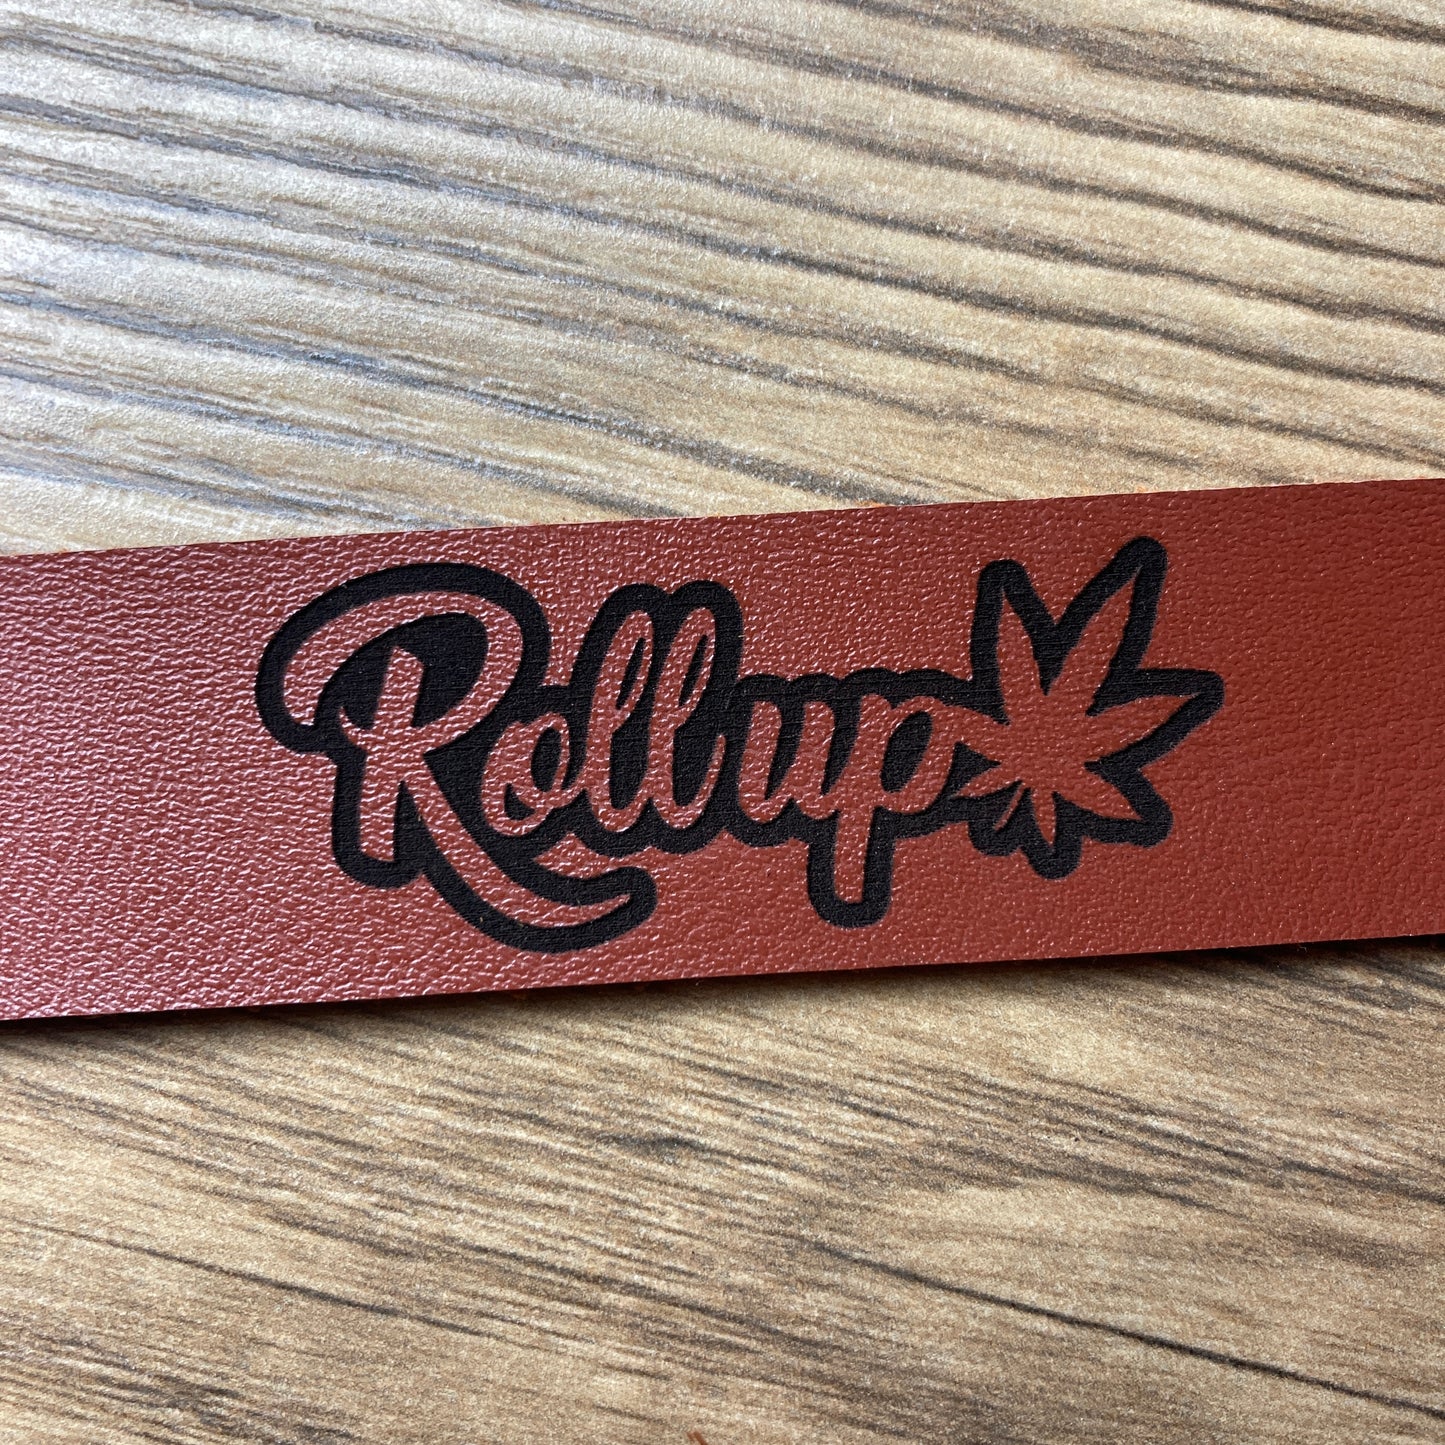 Rollup Leather Keychain